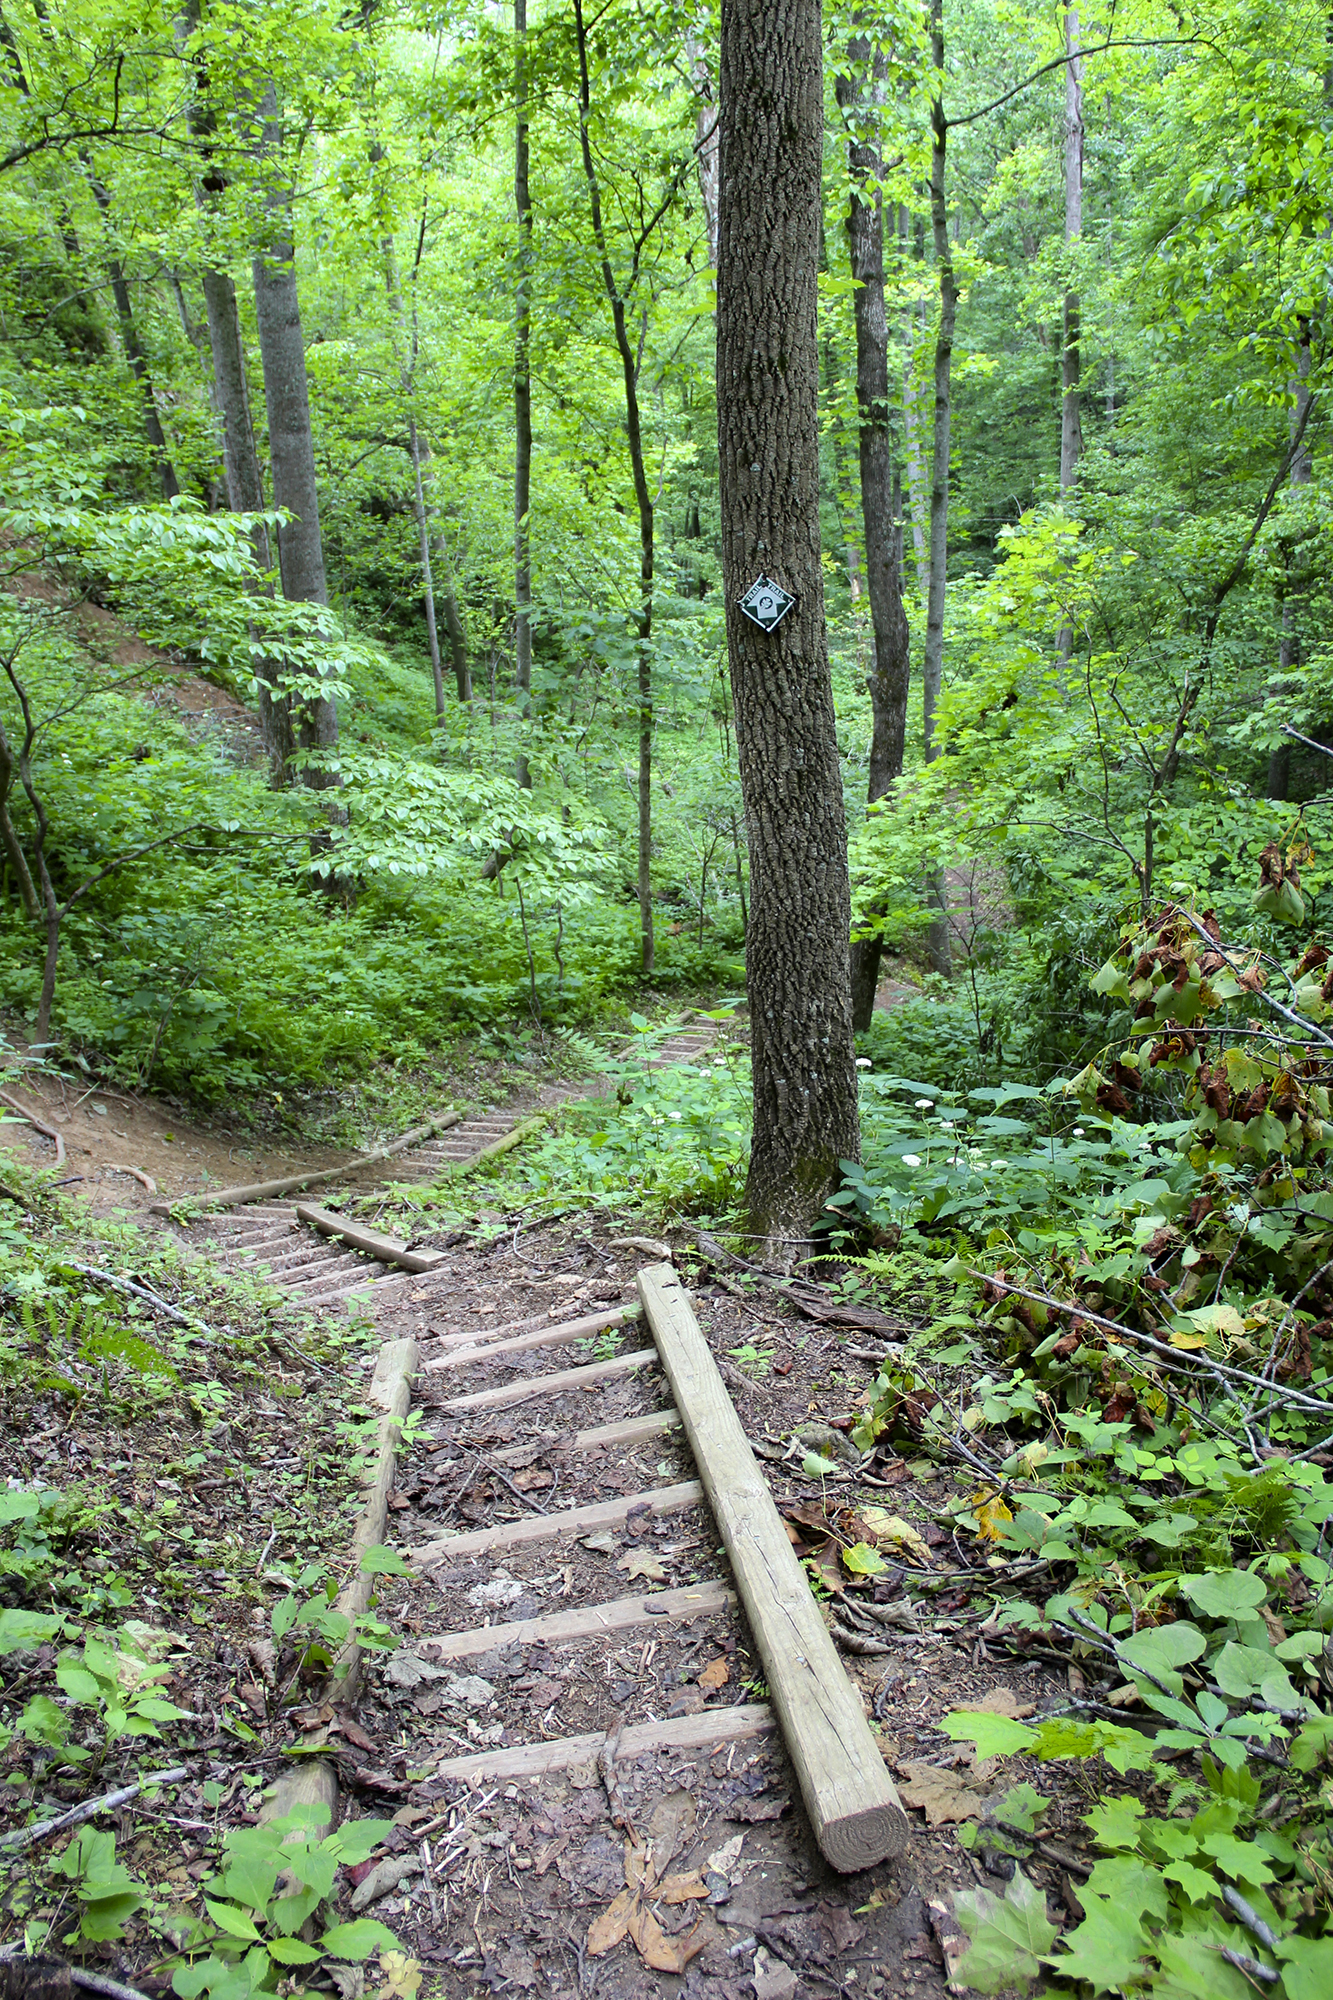 A ladder trail leads into the forest.